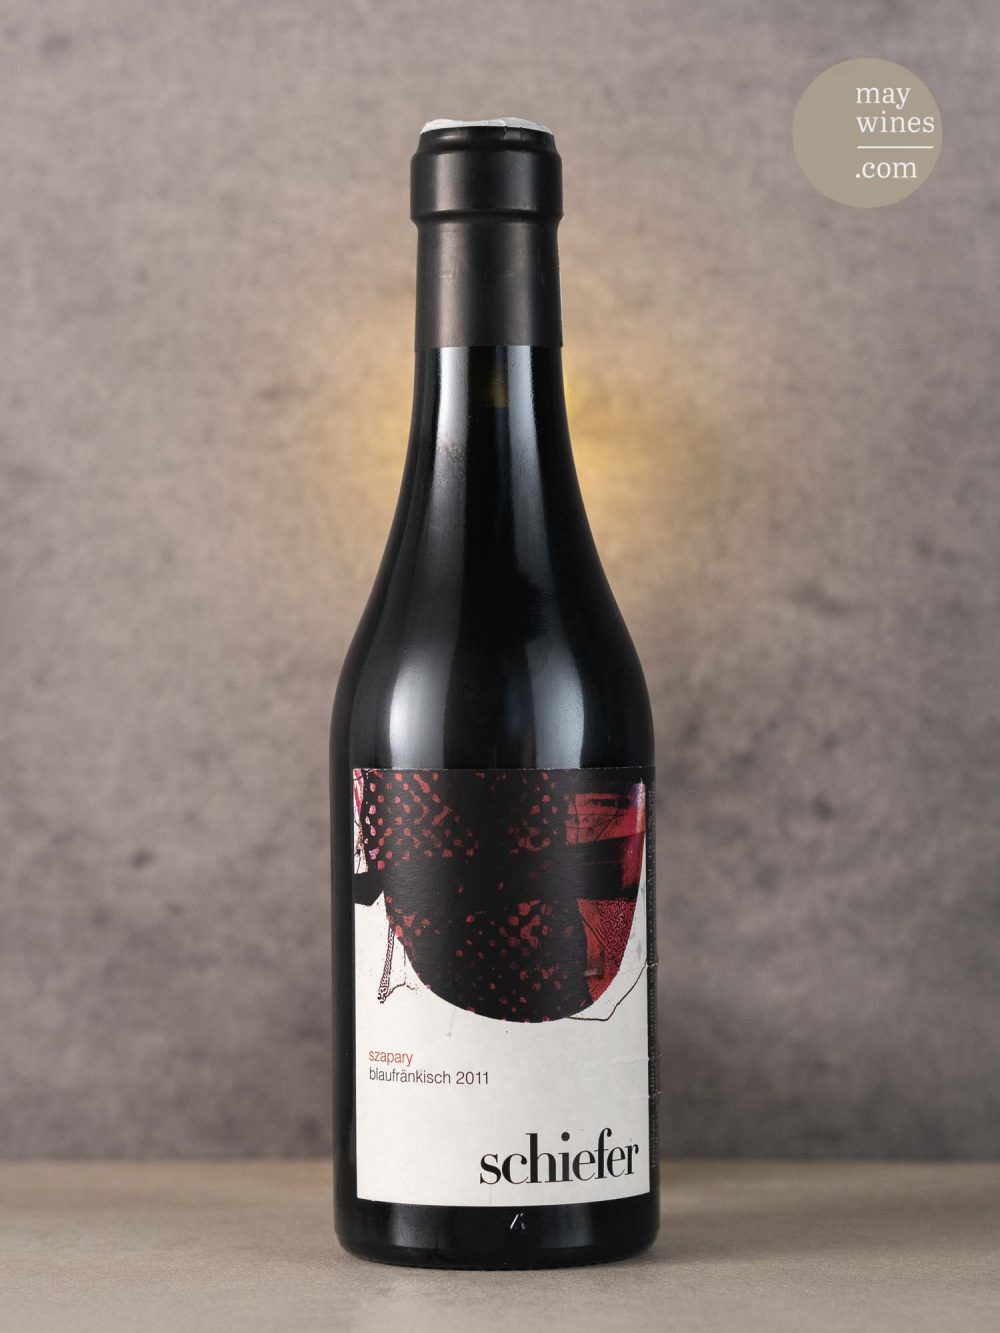 May Wines – Rotwein – 2011 Szapary - Weingut Schiefer